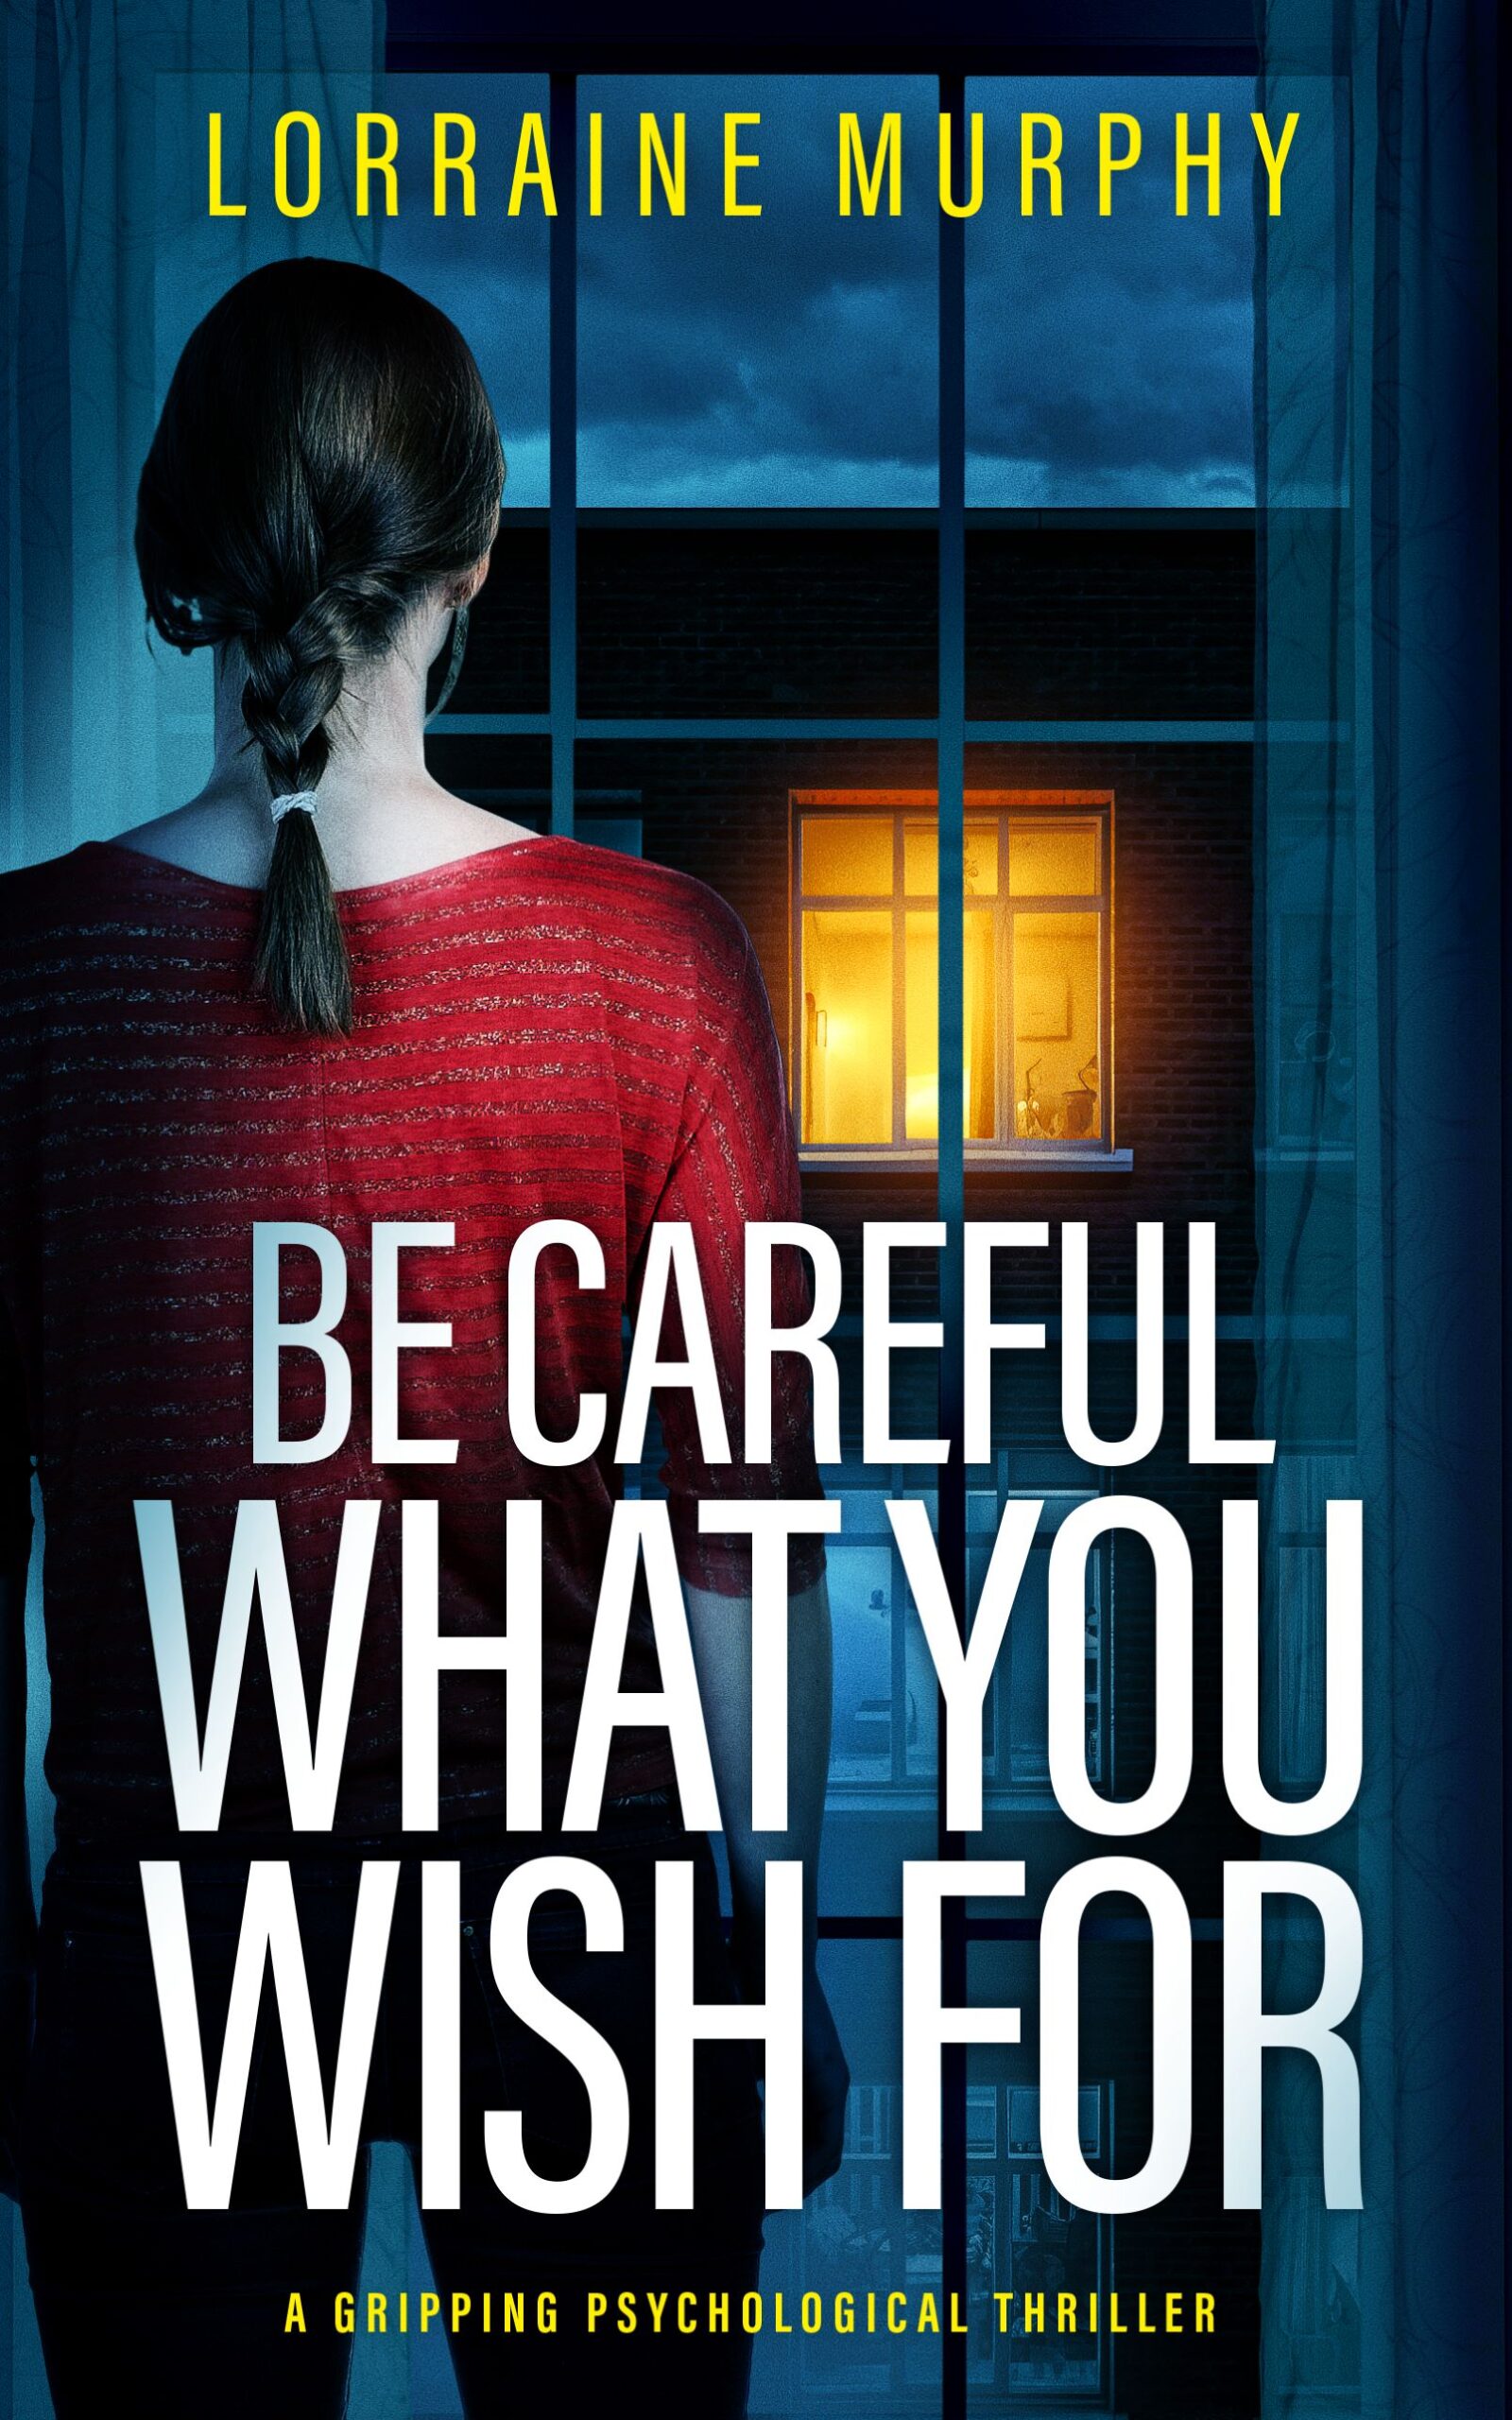 LORRAINE MURPHY NEW RELEASE – BE CAREFUL WHAT YOU WISH FOR